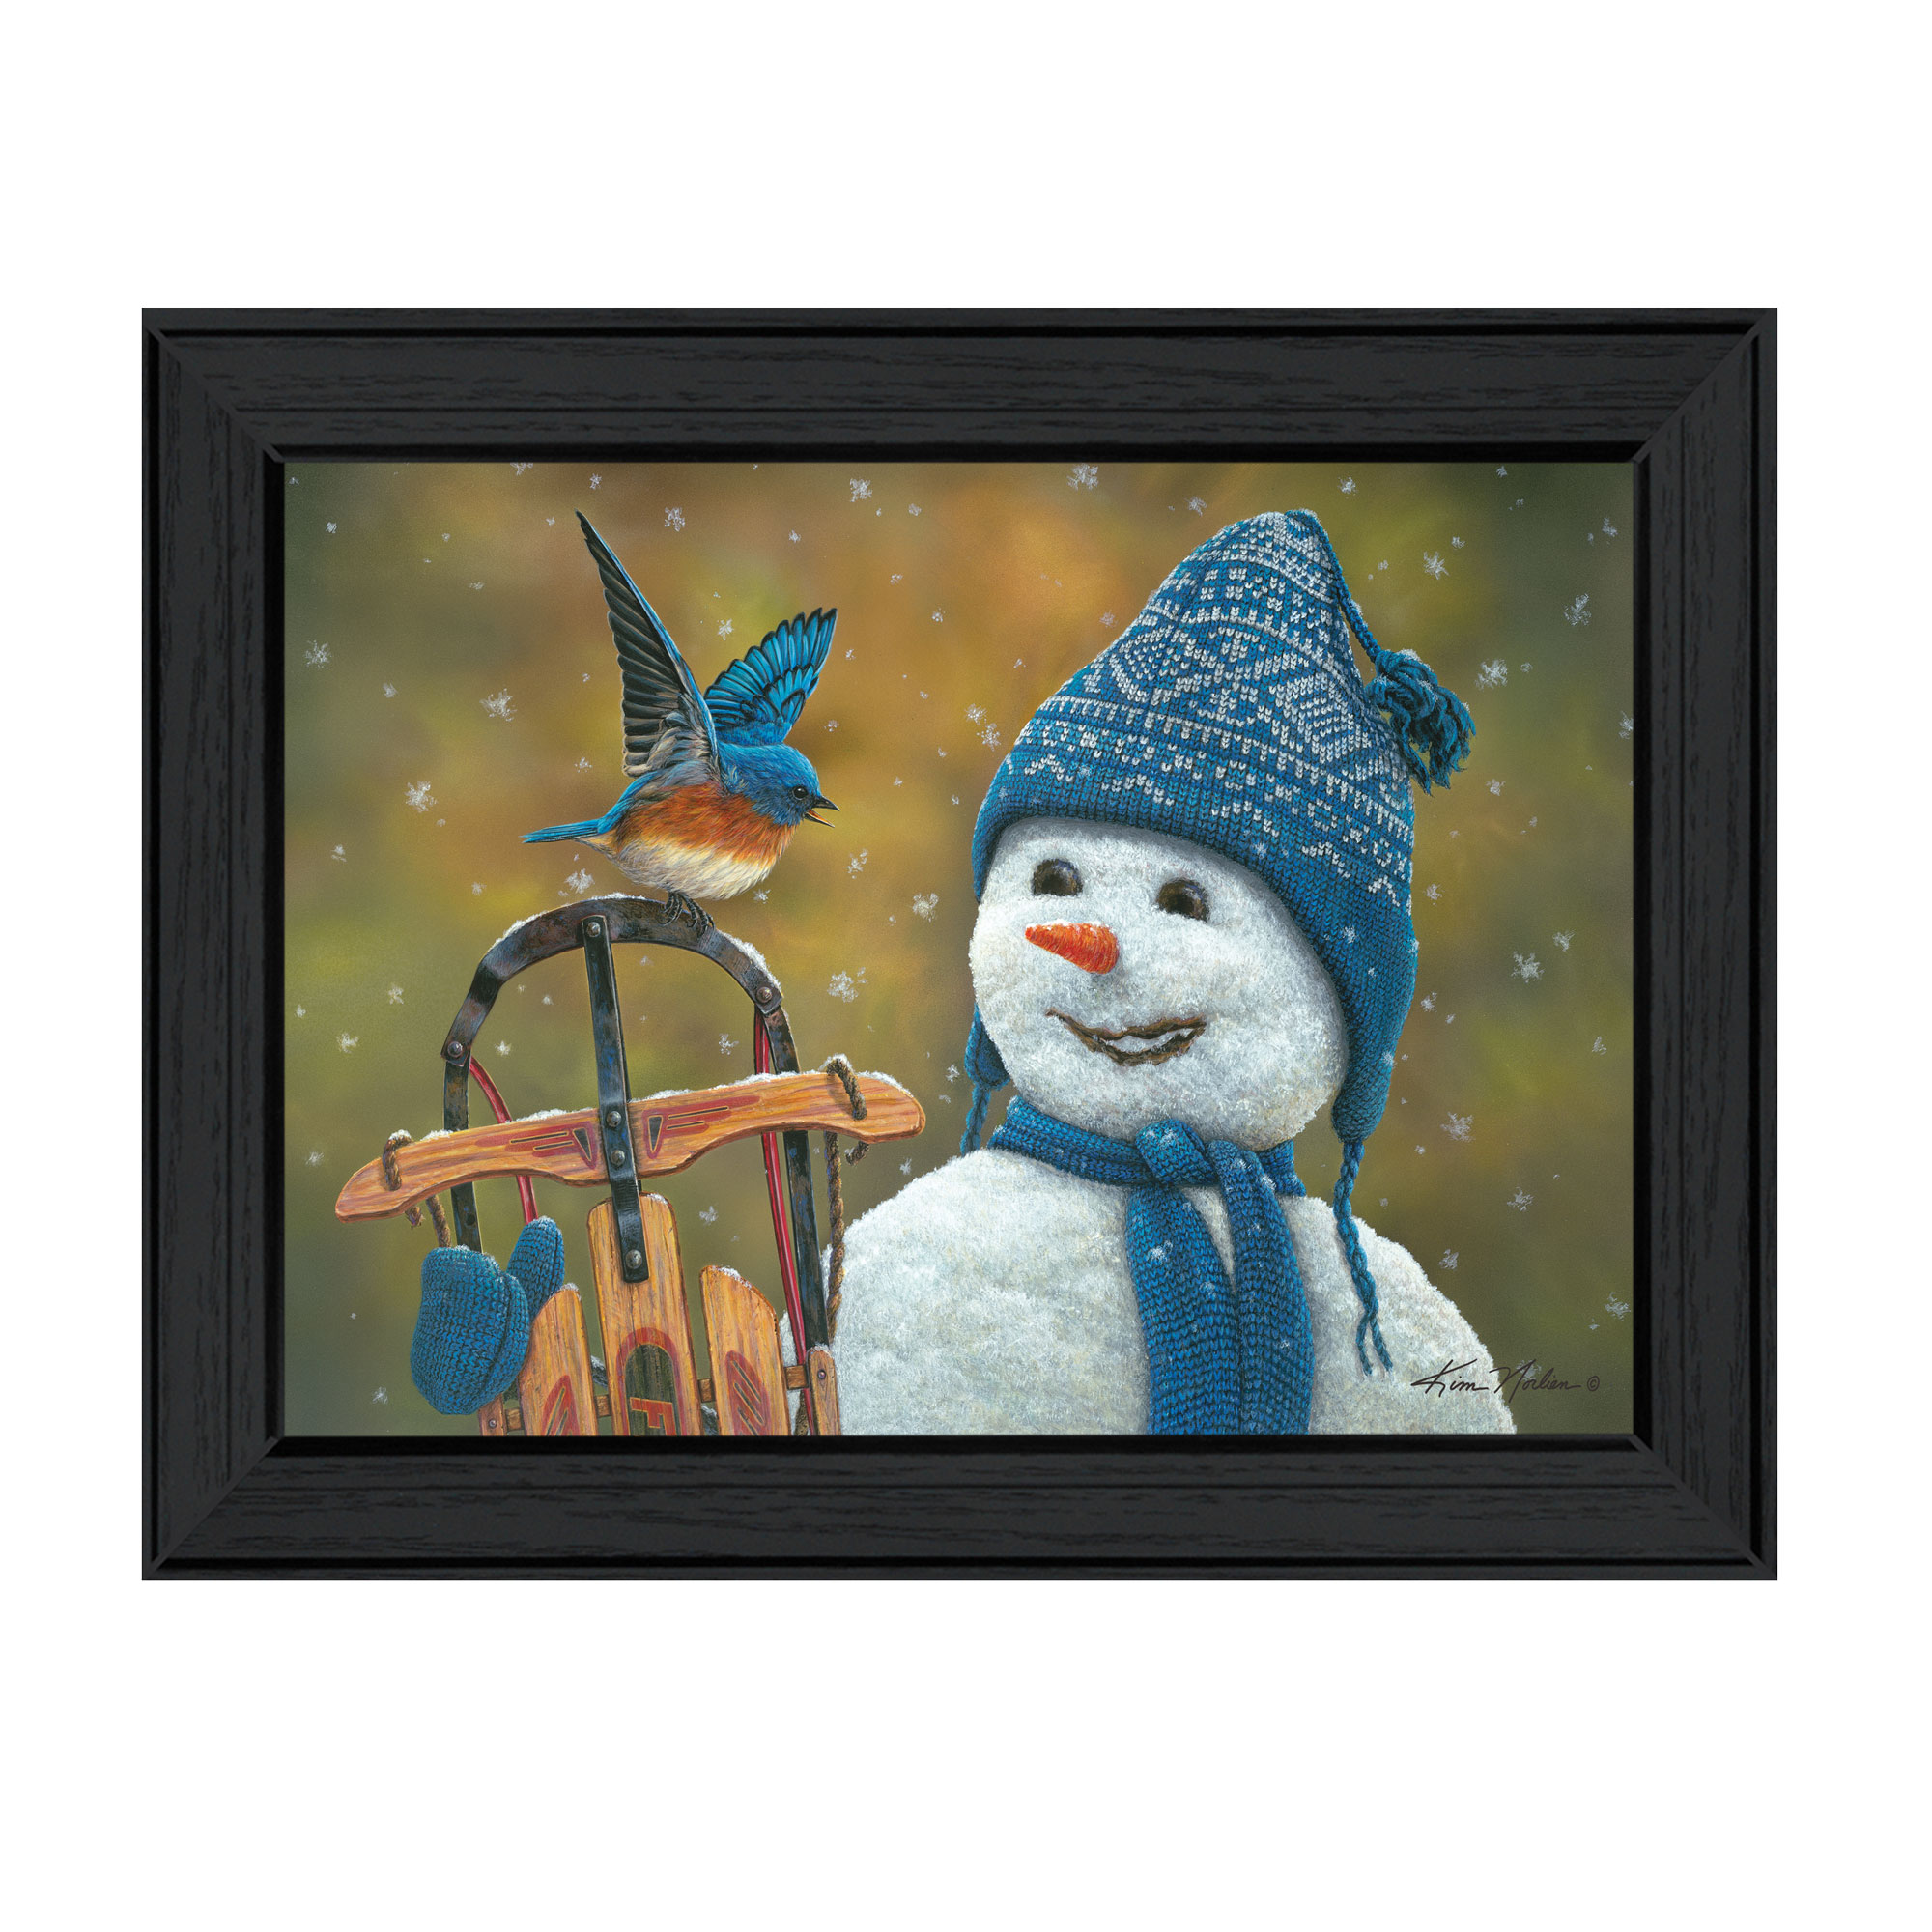 "Snow Brother - Snowman" by Kim Norlien, Ready to Hang Framed Print, Black Frame